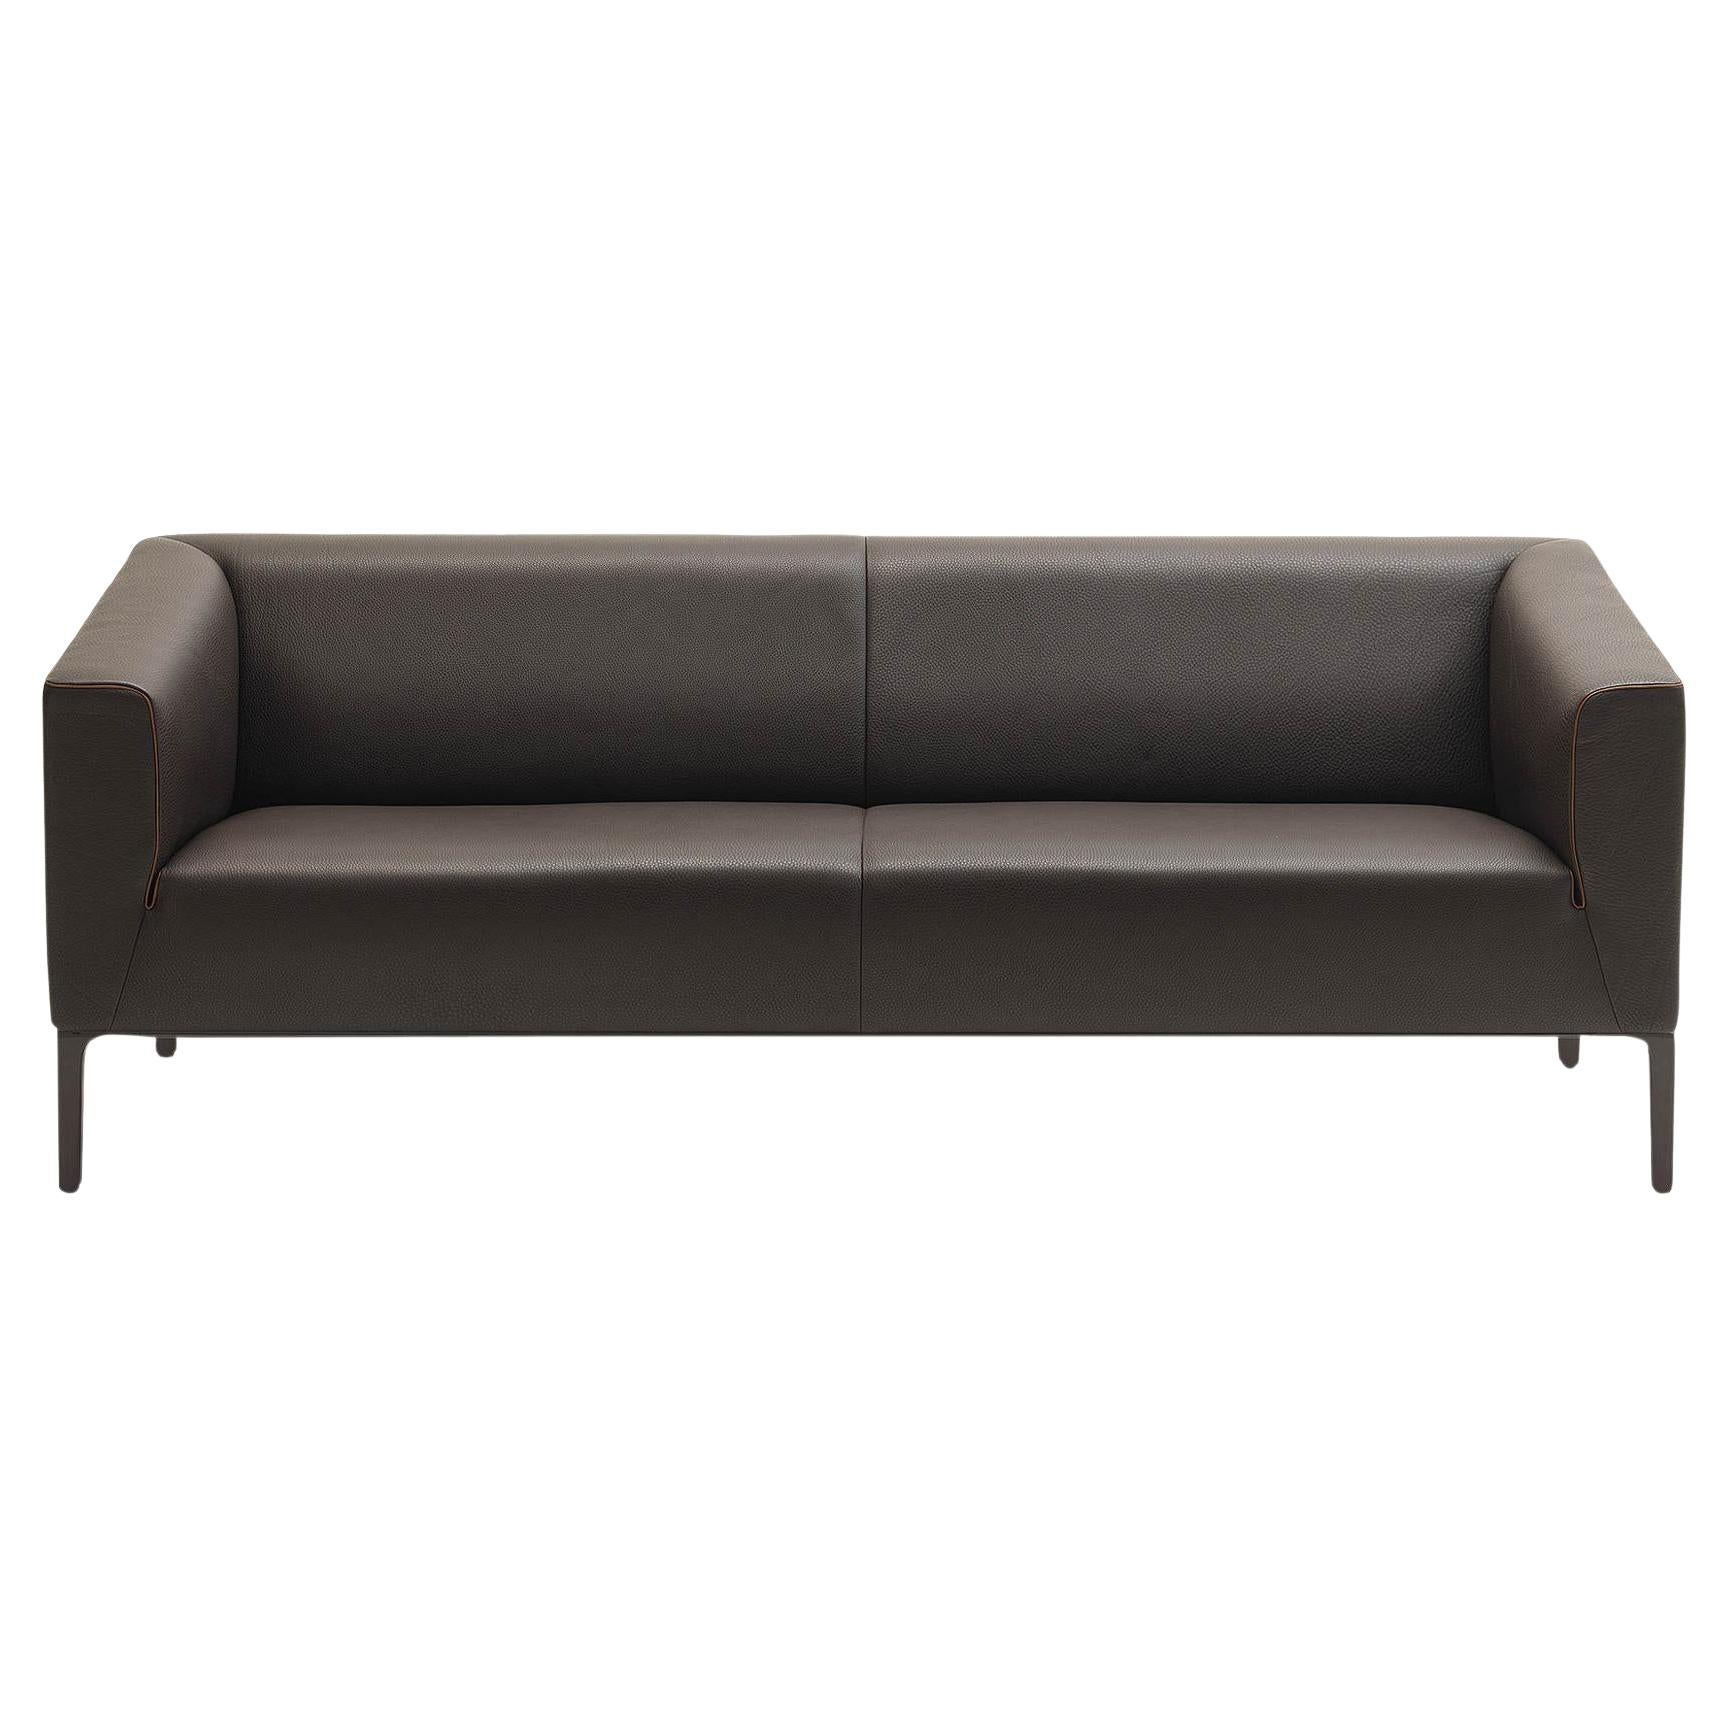 De Sede DS-161 Three-Seat Sofa in Schiefer Upholstery by De Sede Design Team For Sale